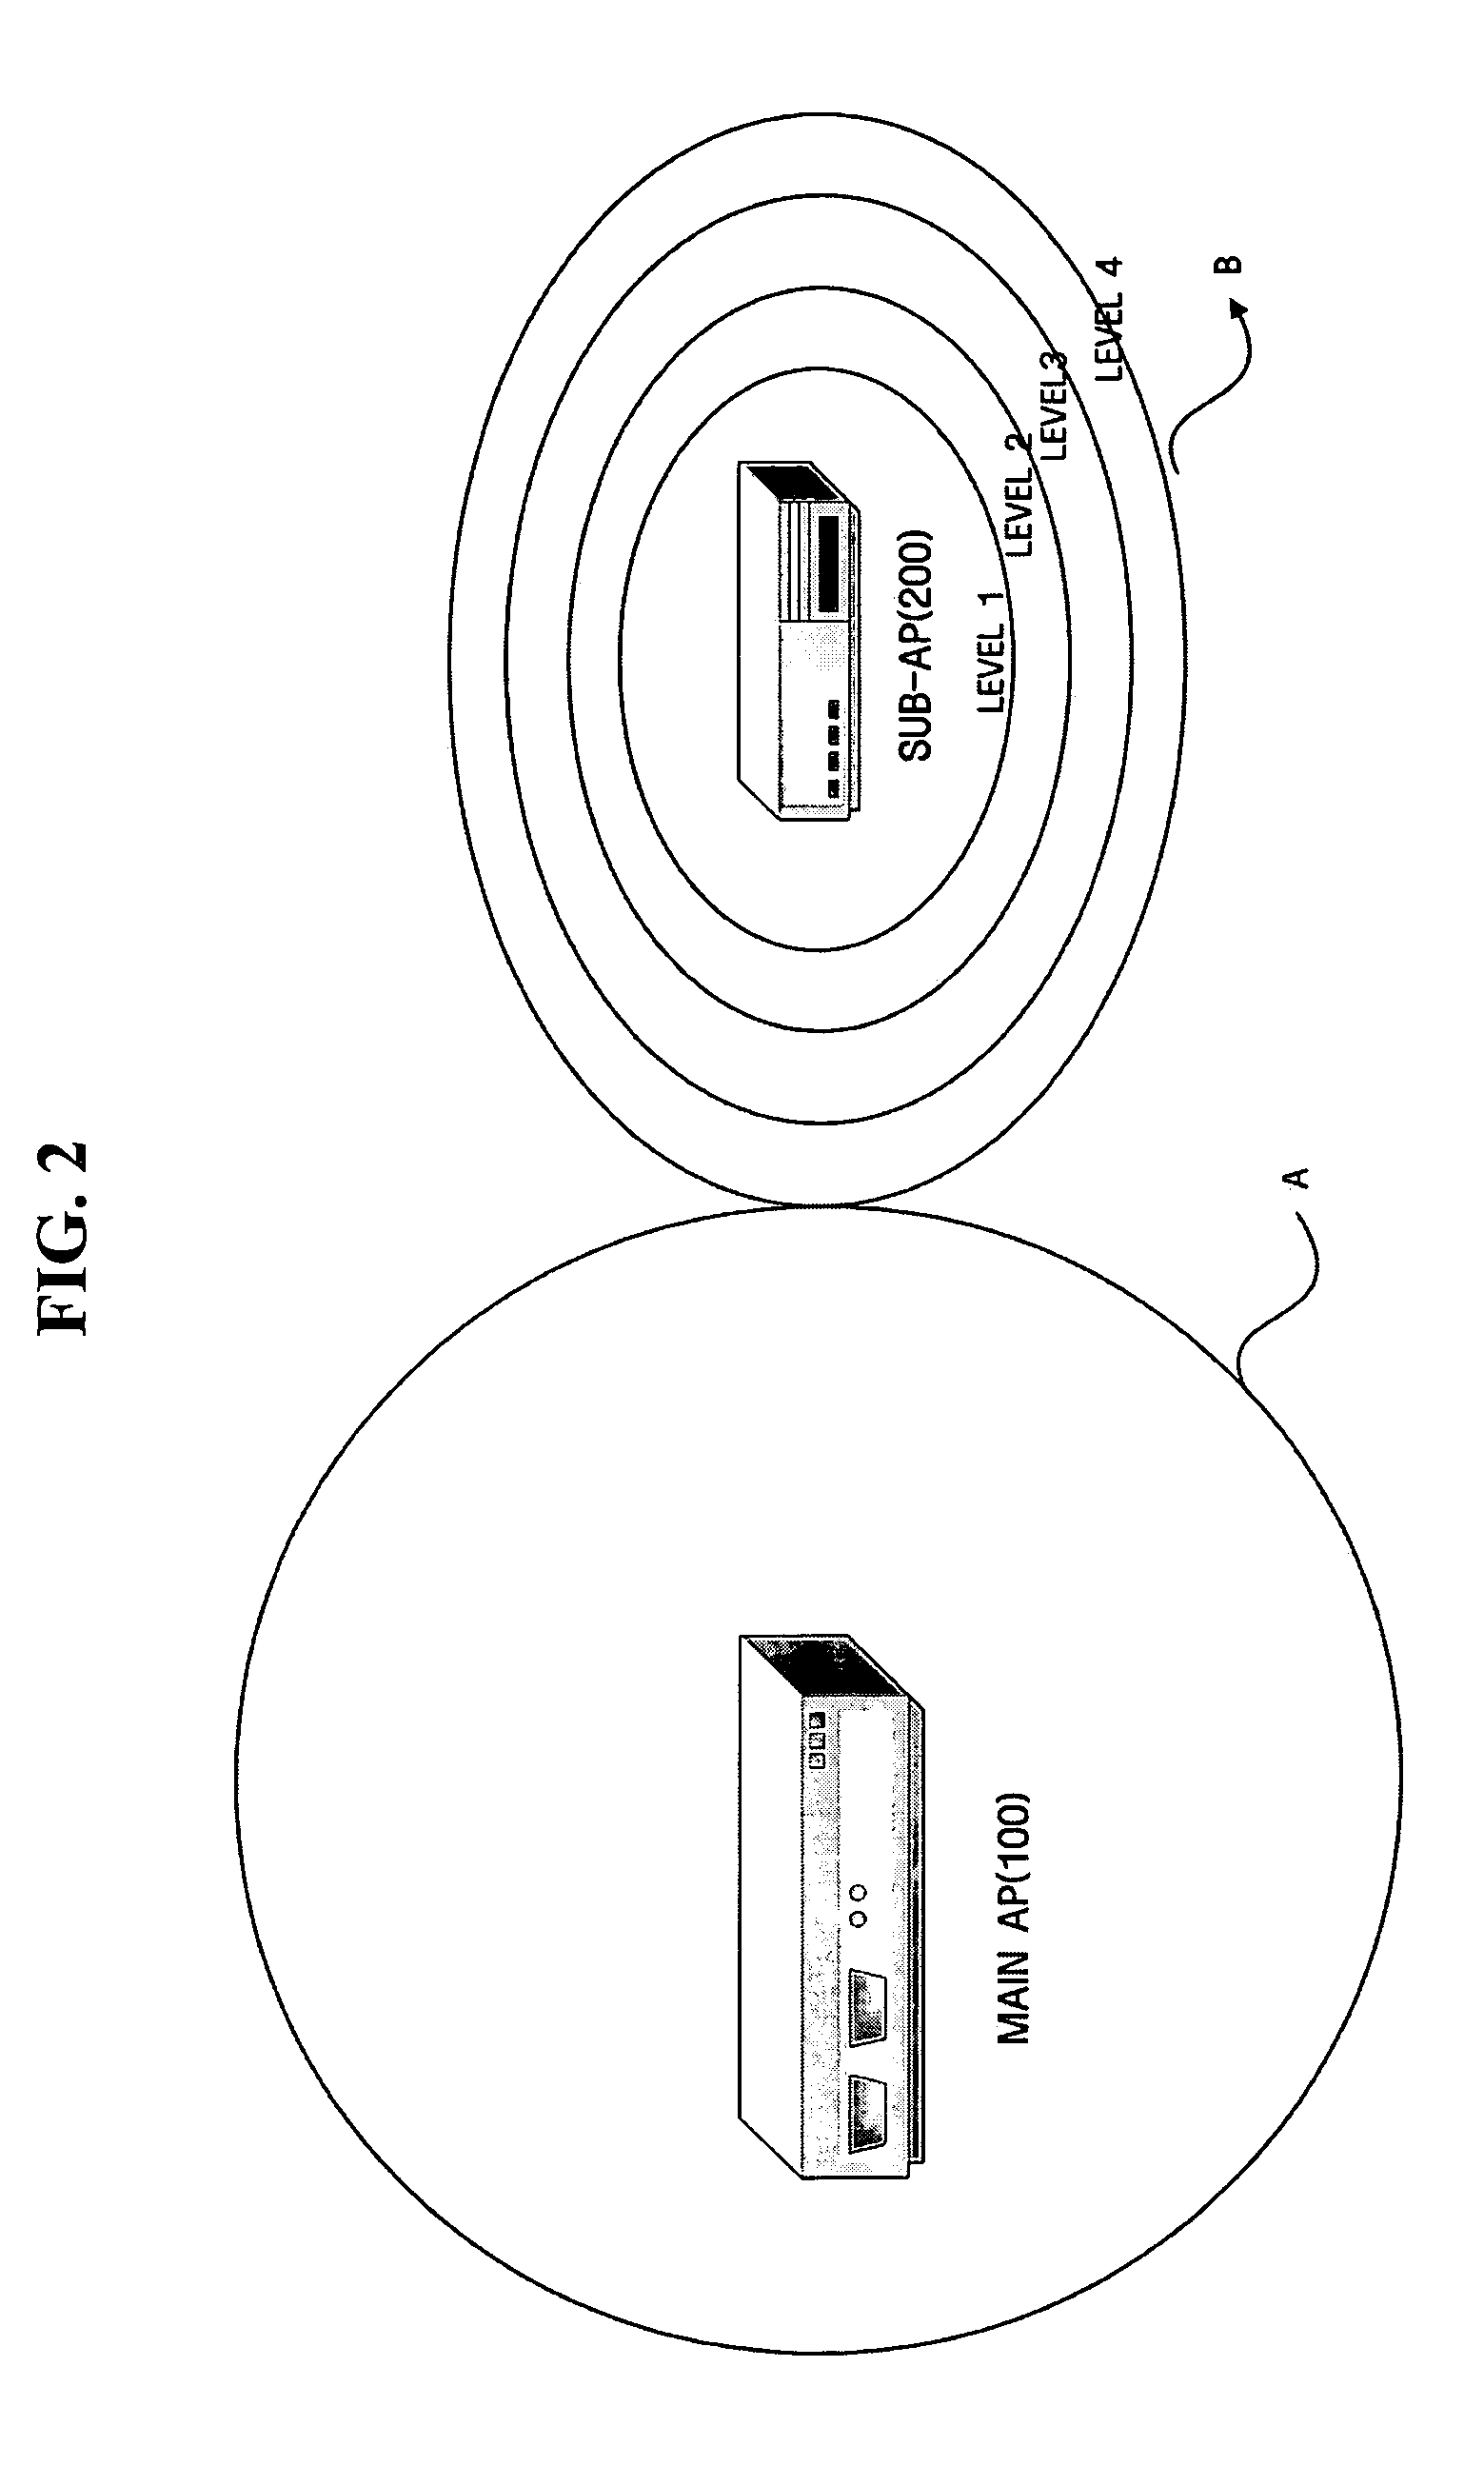 Sub-access point, system, and method for adjusting power of transmission signal